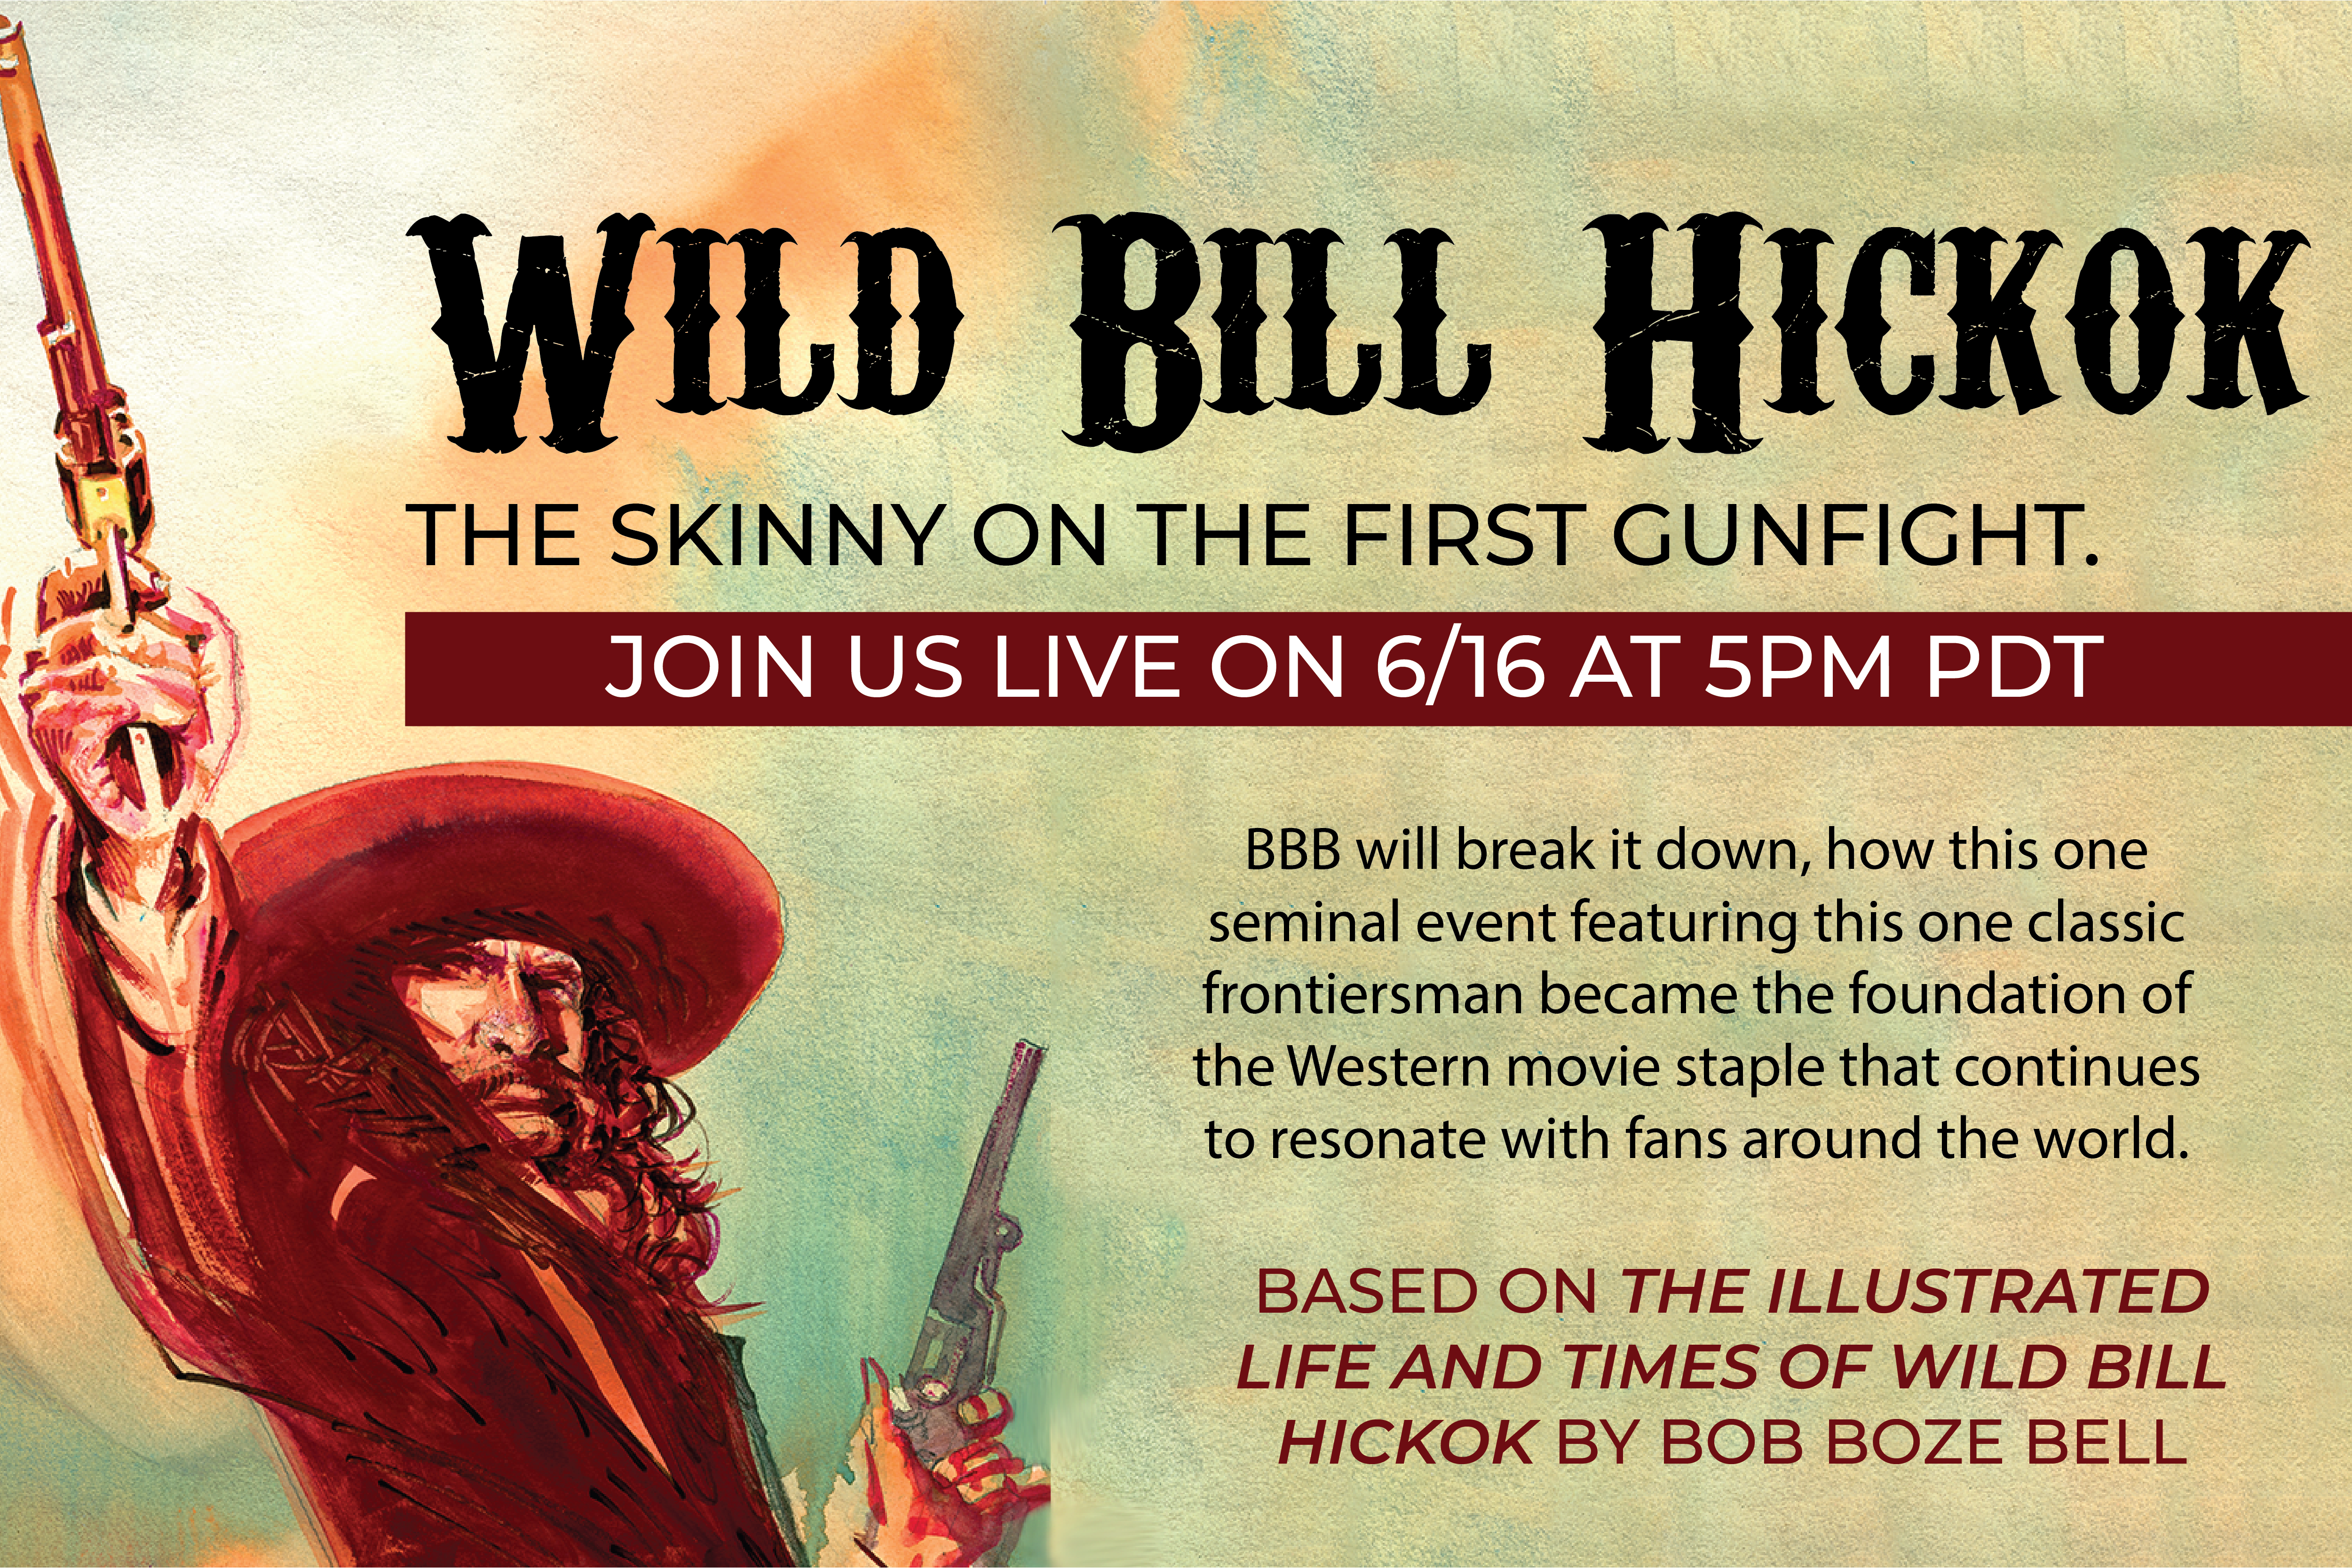 LIVE EVENT: Wild Bill Hickok The Skinny on the First Gunfight